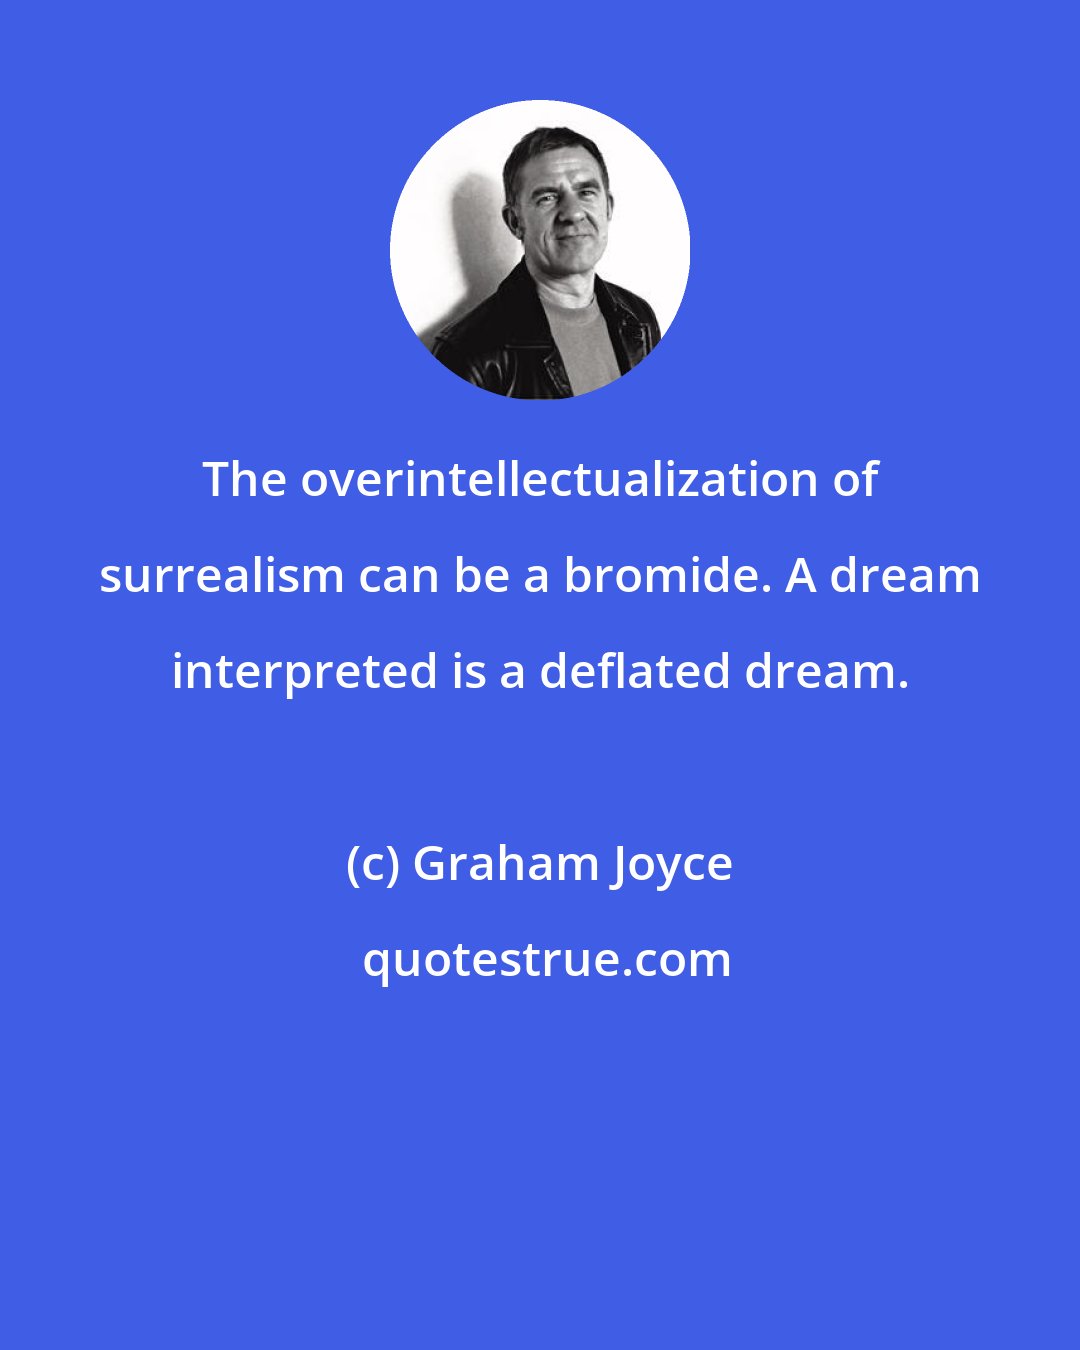 Graham Joyce: The overintellectualization of surrealism can be a bromide. A dream interpreted is a deflated dream.